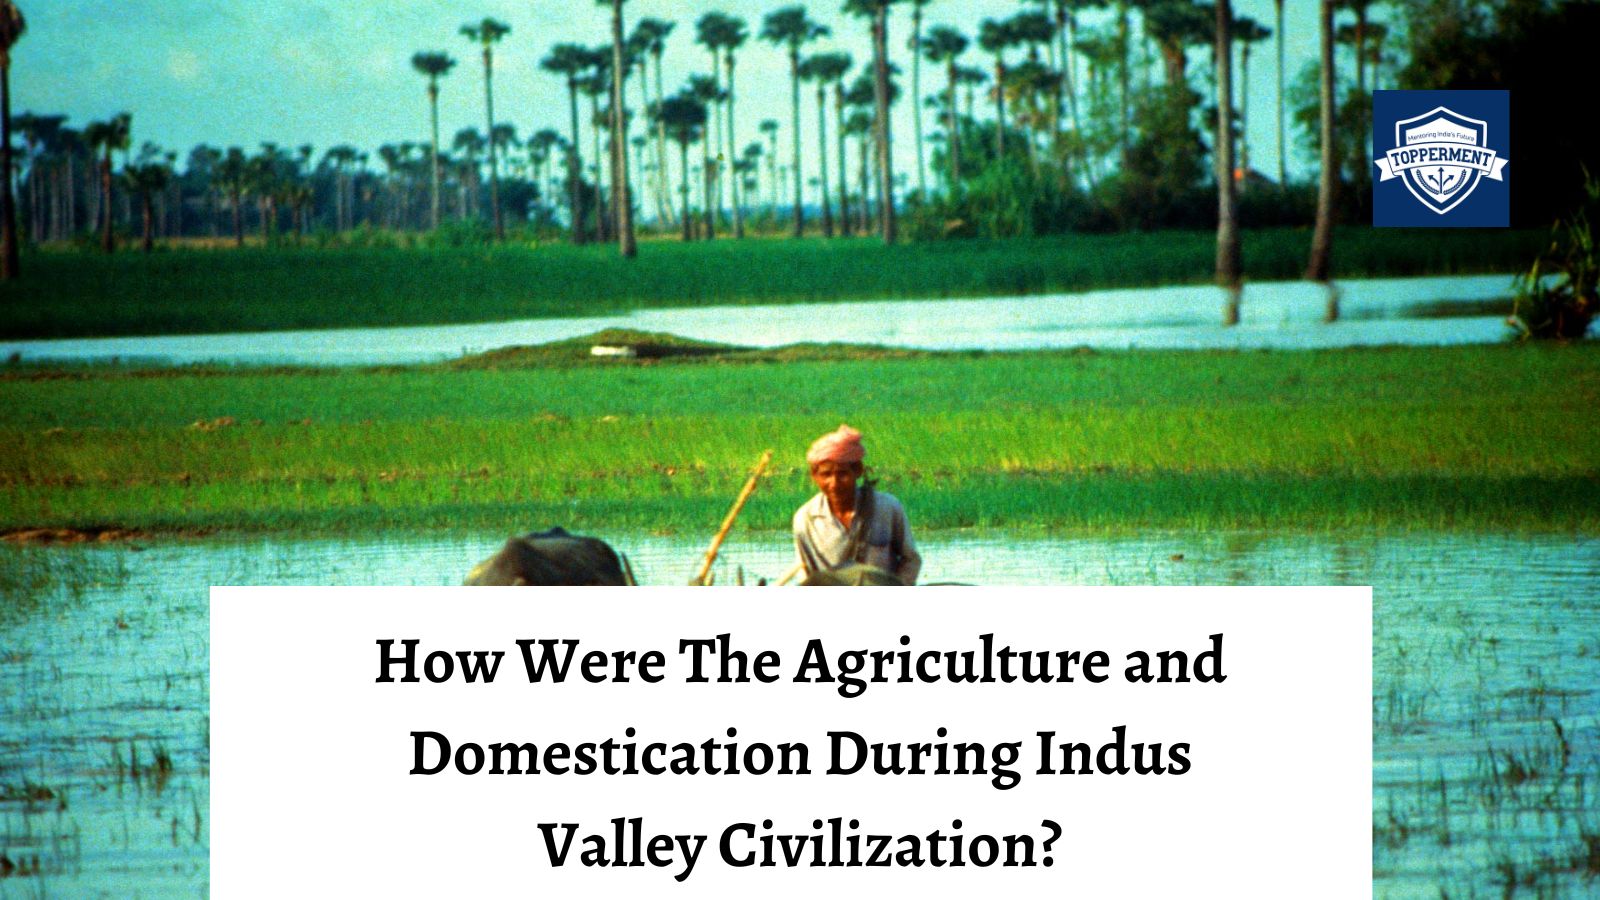 How were agriculture and domestication of animals during Indus Valley Civilization? | Best UPSC IAS Coaching For Mentorship And Guidance